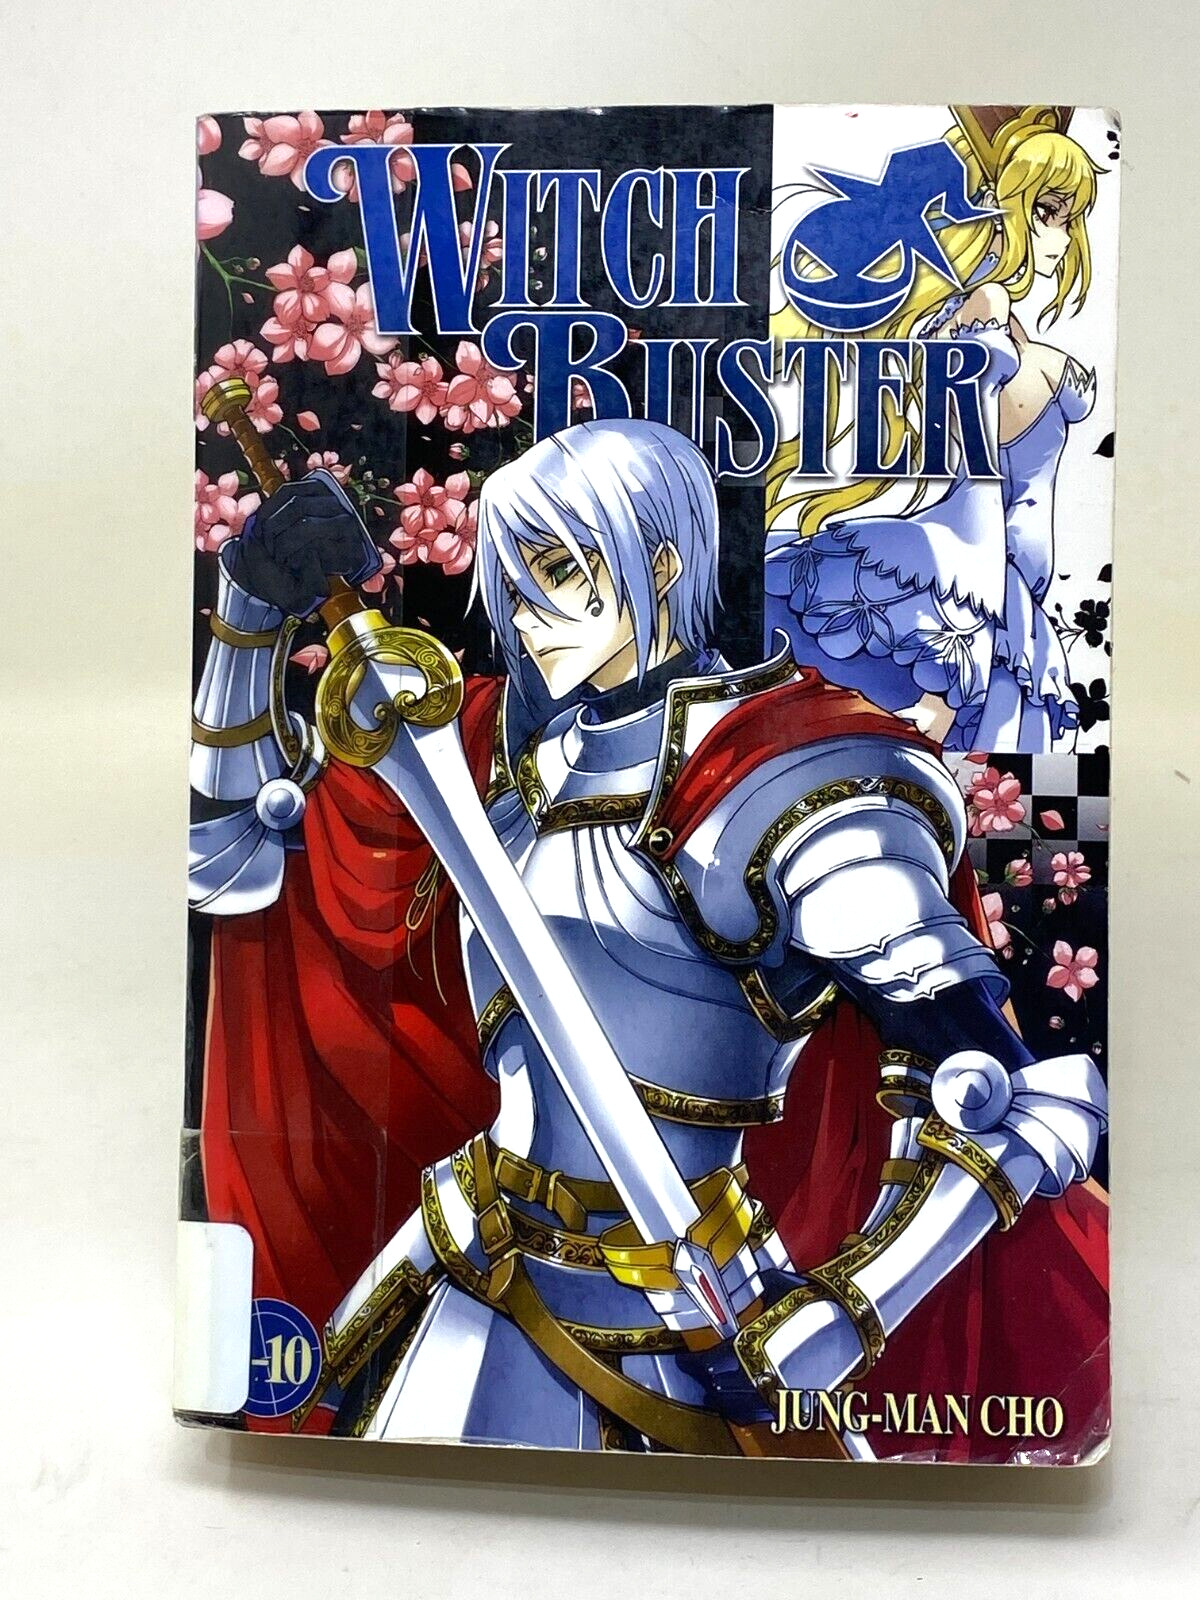 Witch Buster Book Volume 9-10 by Jung-Man Cho VG